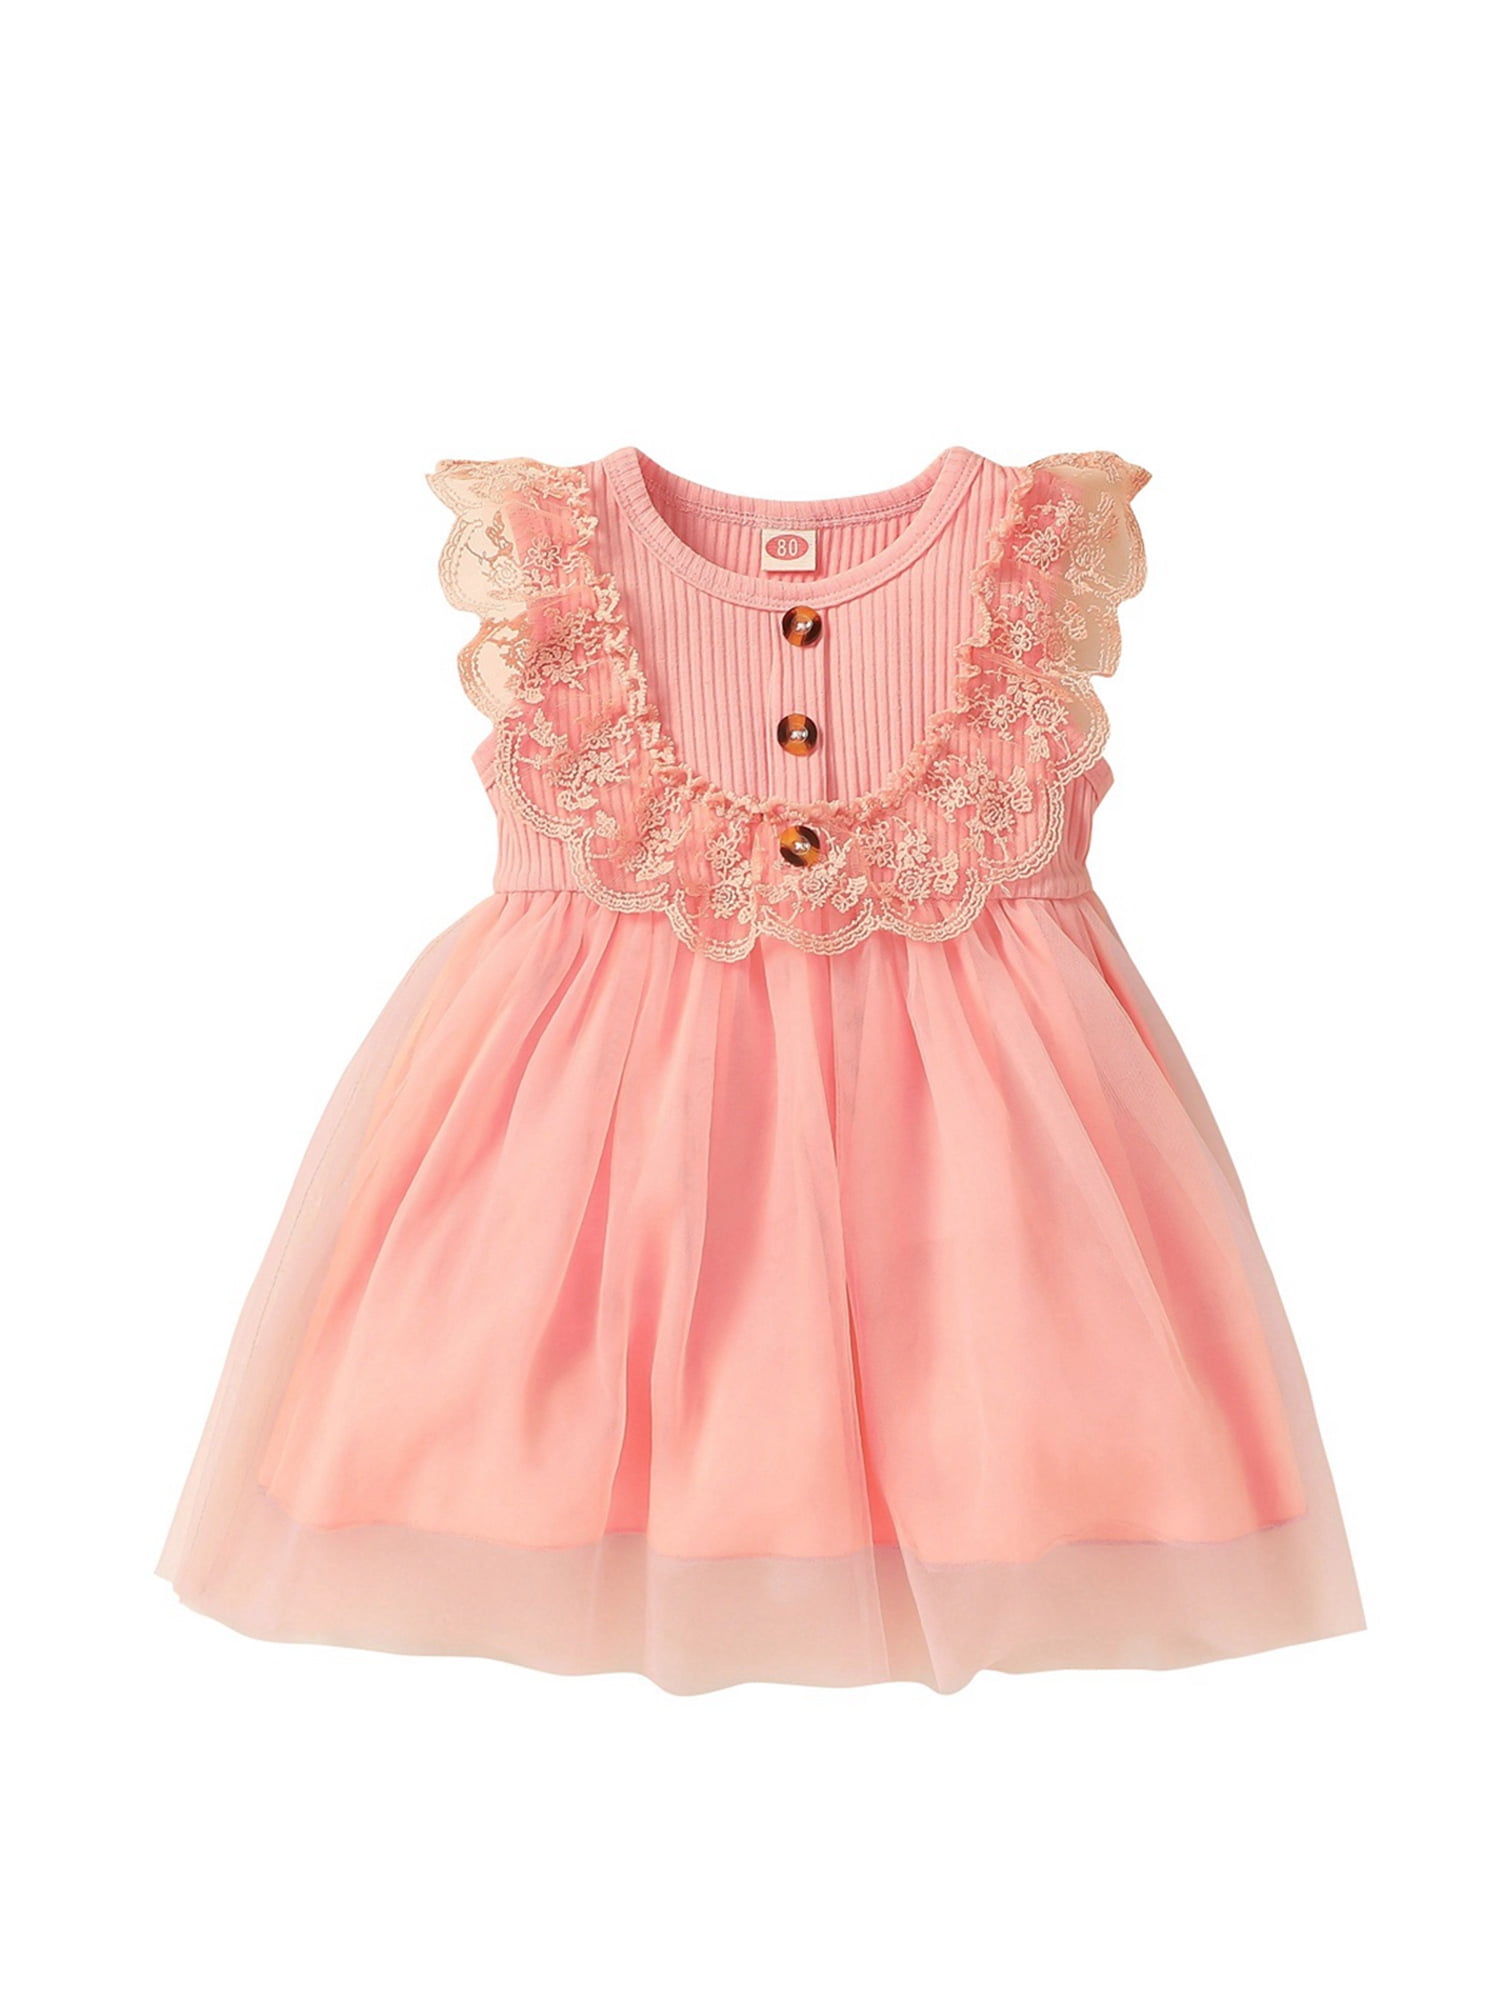 Canrulo Toddler Baby Girl Summer Dress Lace Ruffle Solid Color Tulle Princess Party Dresses Sundress Pink 3-4 Years